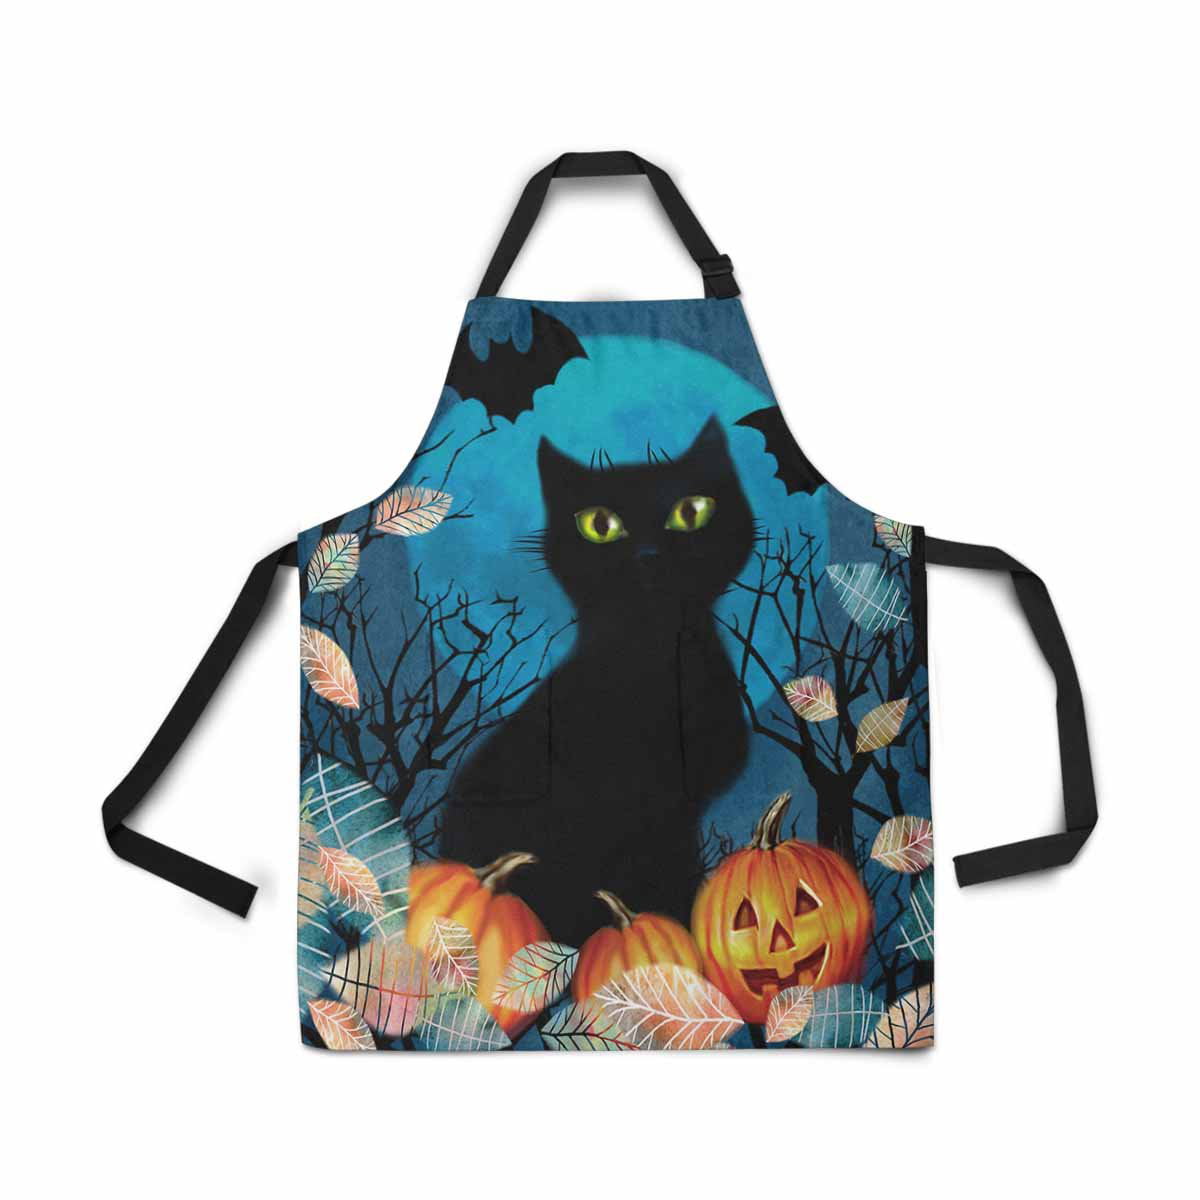 ASHLEIGH Adjustable Bib Apron for Women Men Girls Chef with Pockets Halloween Autumn Tree Black Cat Pumpkin Fall Leaves Moon Kitchen Apron for Cooking Baking Gardening Pet Grooming Cleaning